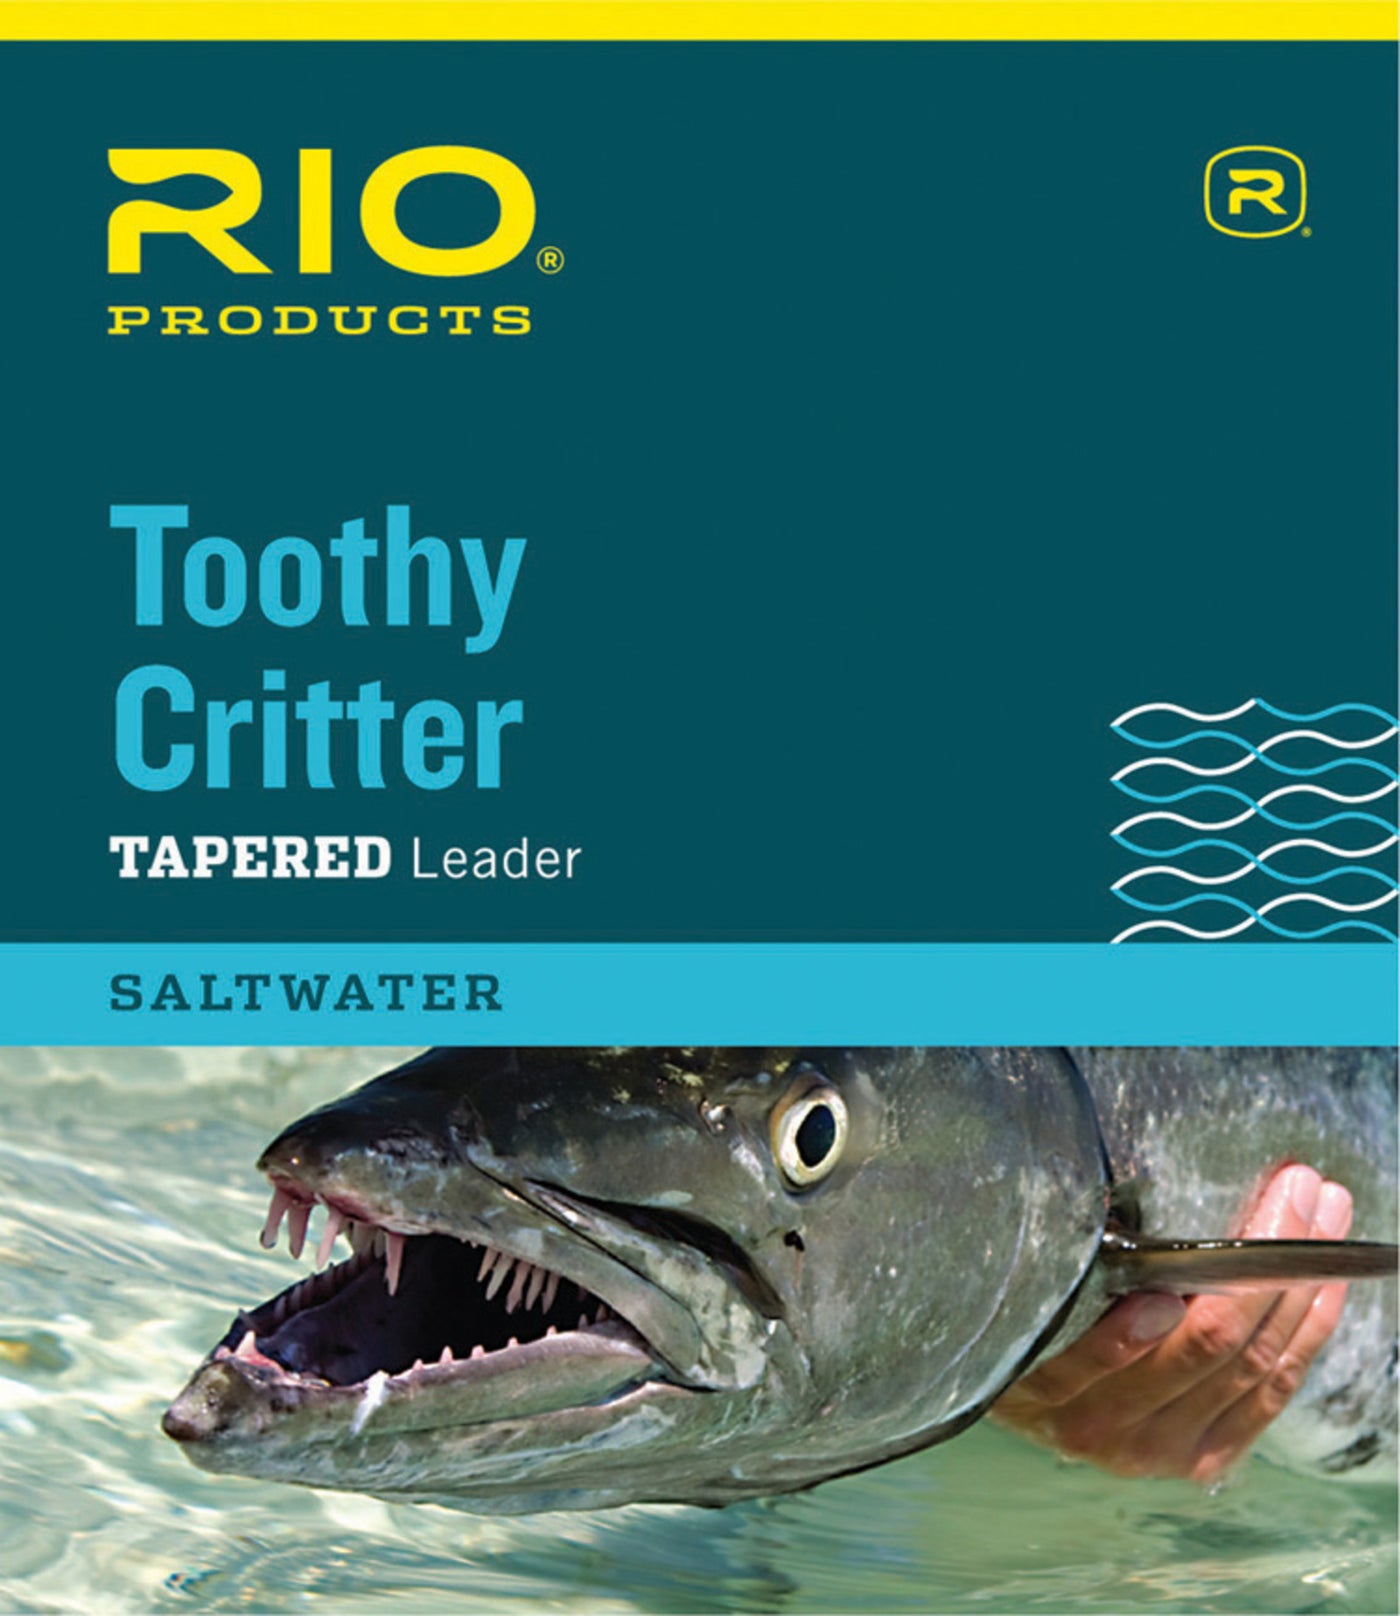 Rio Toothy Critter with snap link